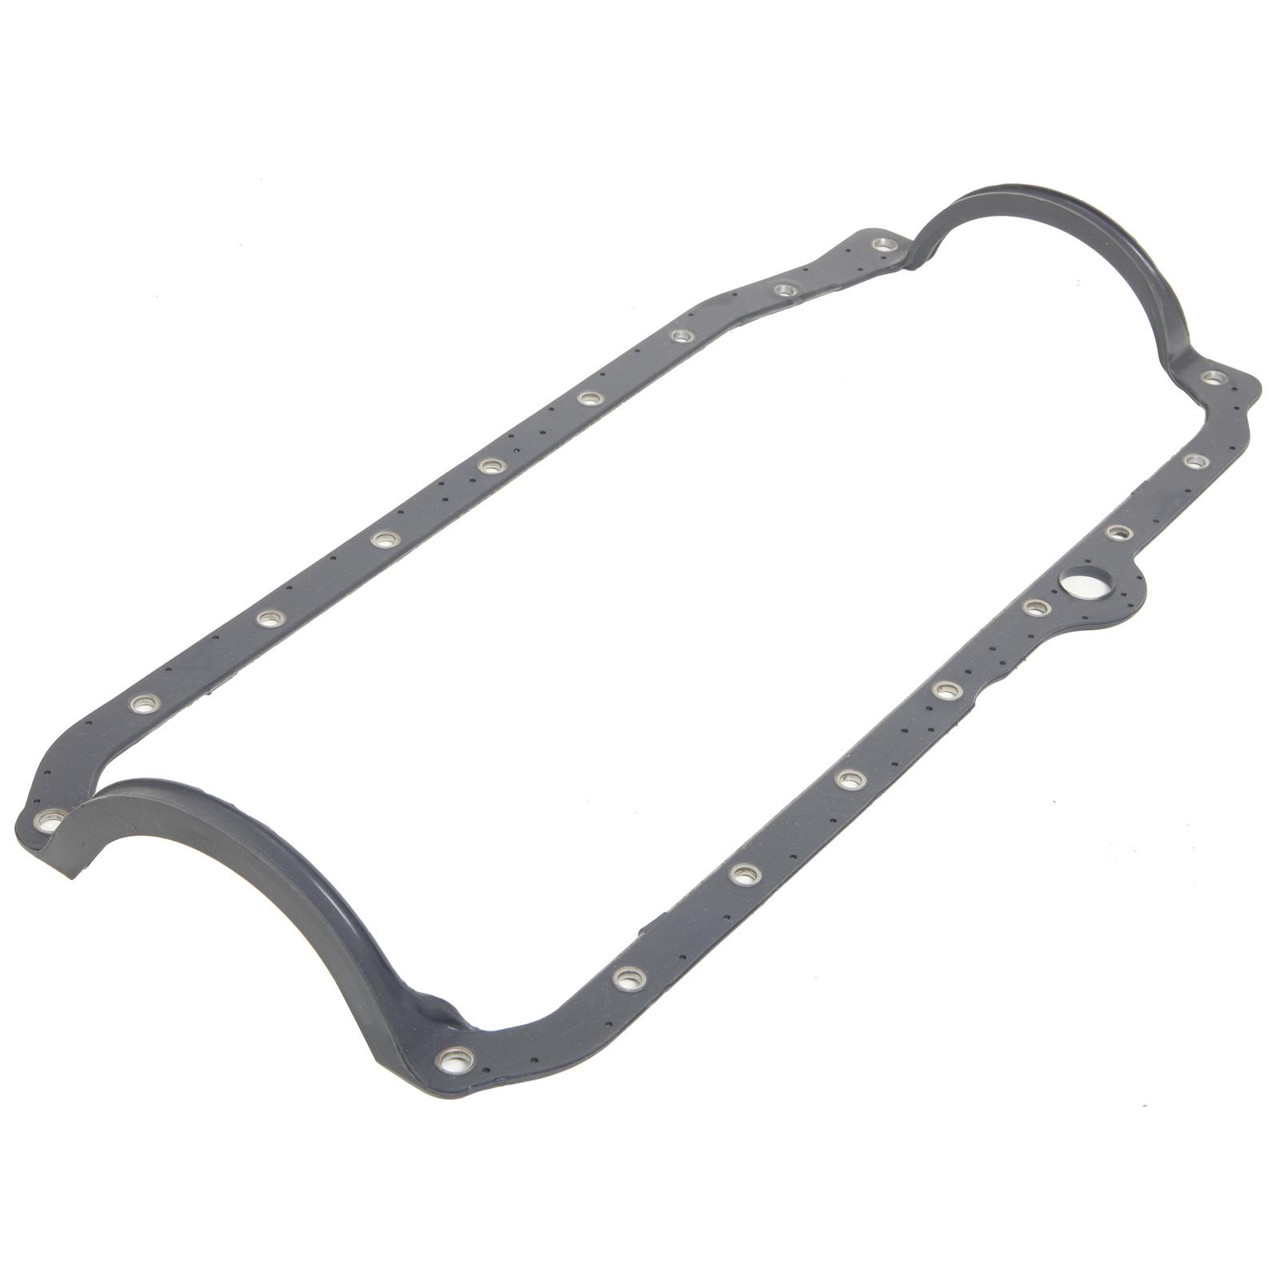 Moroso 93151 1-Piece Oil Pan Gasket - Rubber/Steel Core - Small Block Chevy